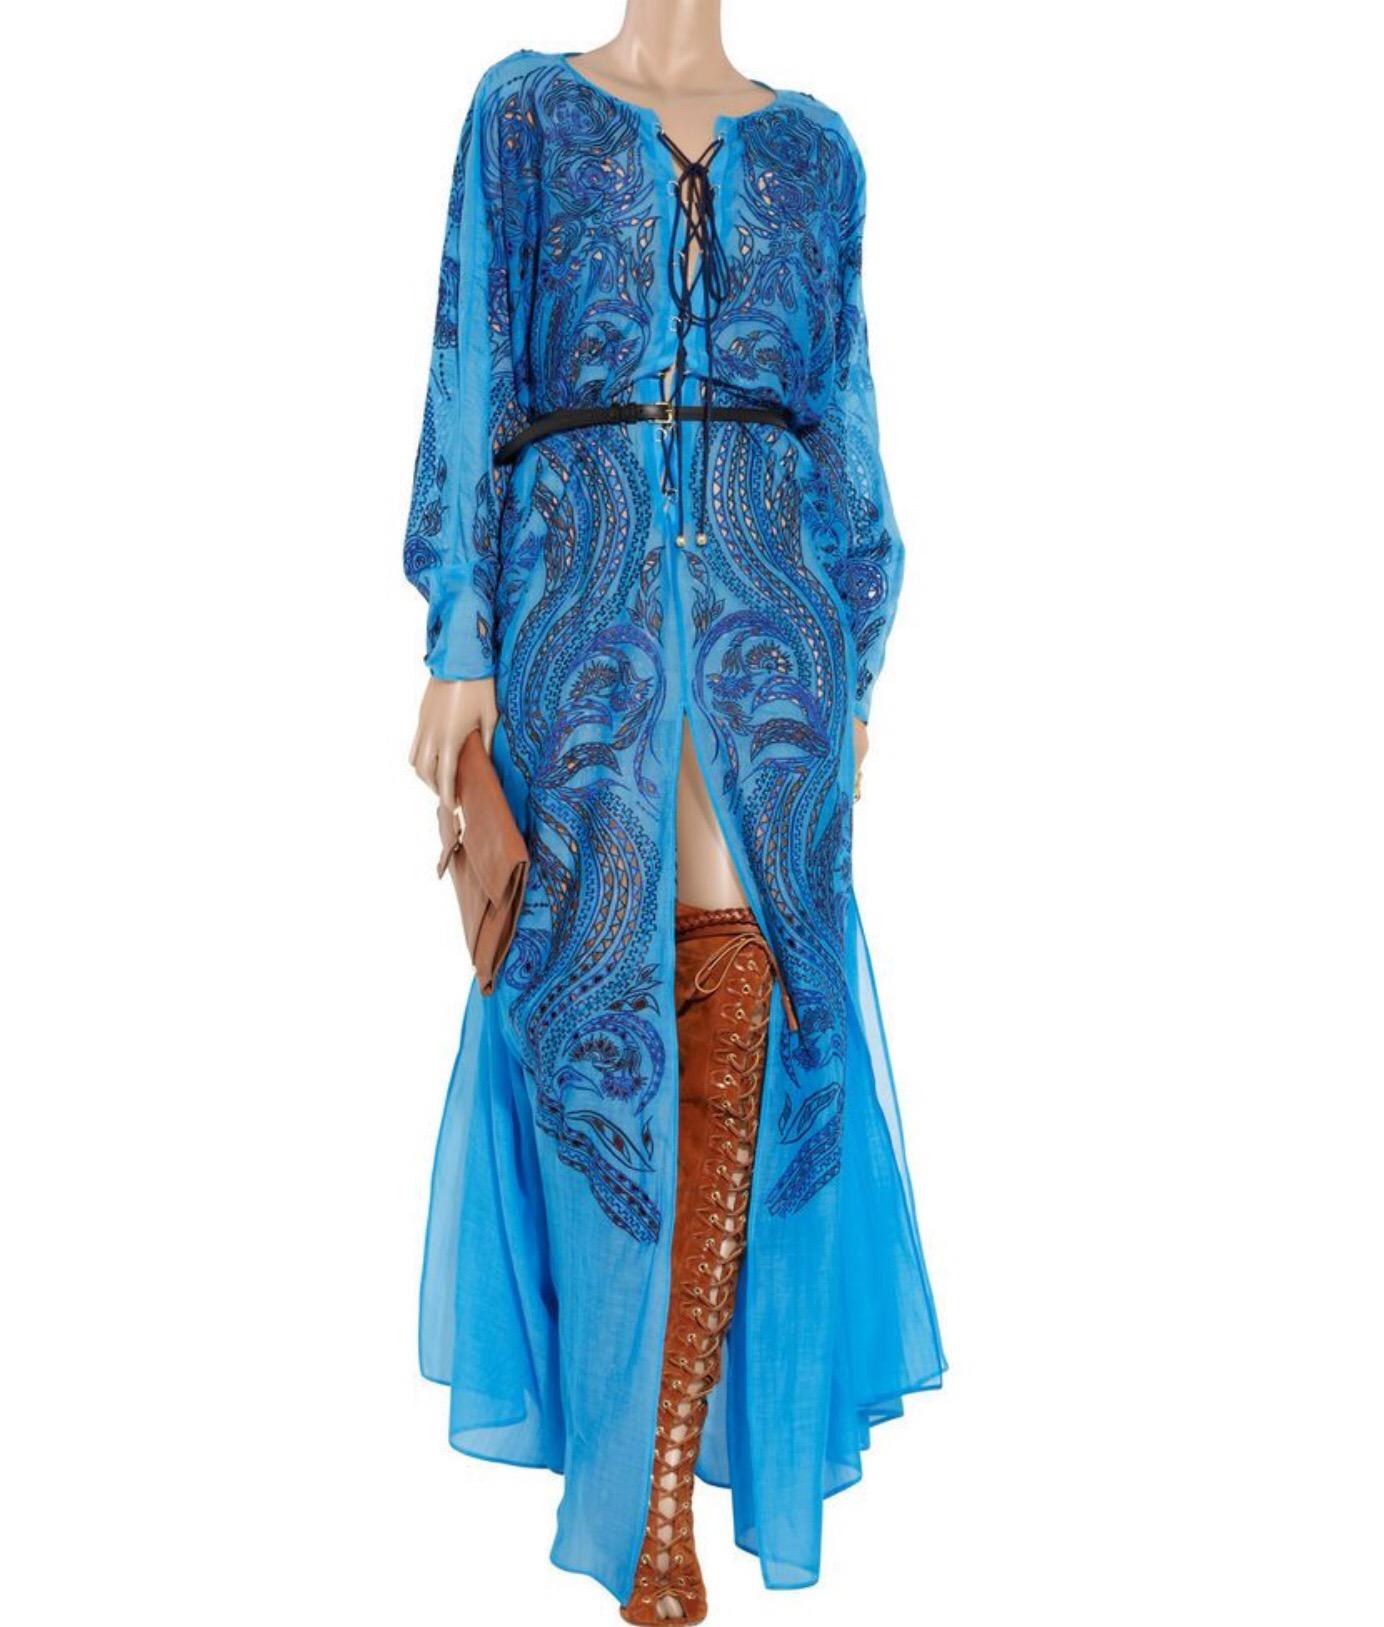 Women's NEW Emilio Pucci by Peter Dundas Lace-Up Eyelet Embroidered Maxi Kaftan Dress